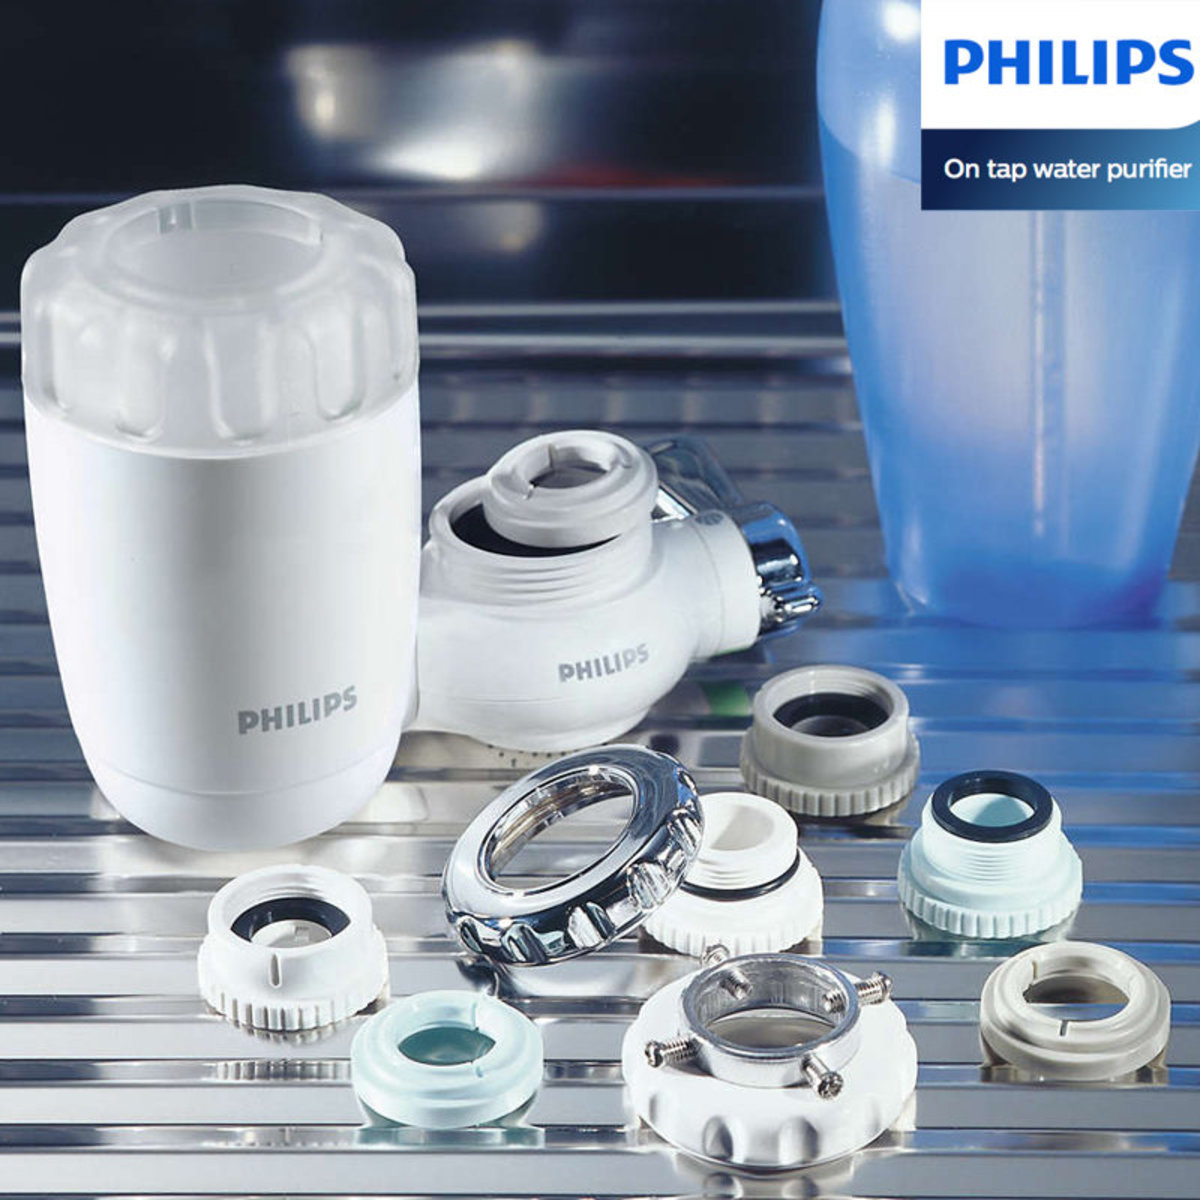 Details about   Philips WP3961 Pure Taste Replacement Filter Cartridge for WP3861 Water Purifier